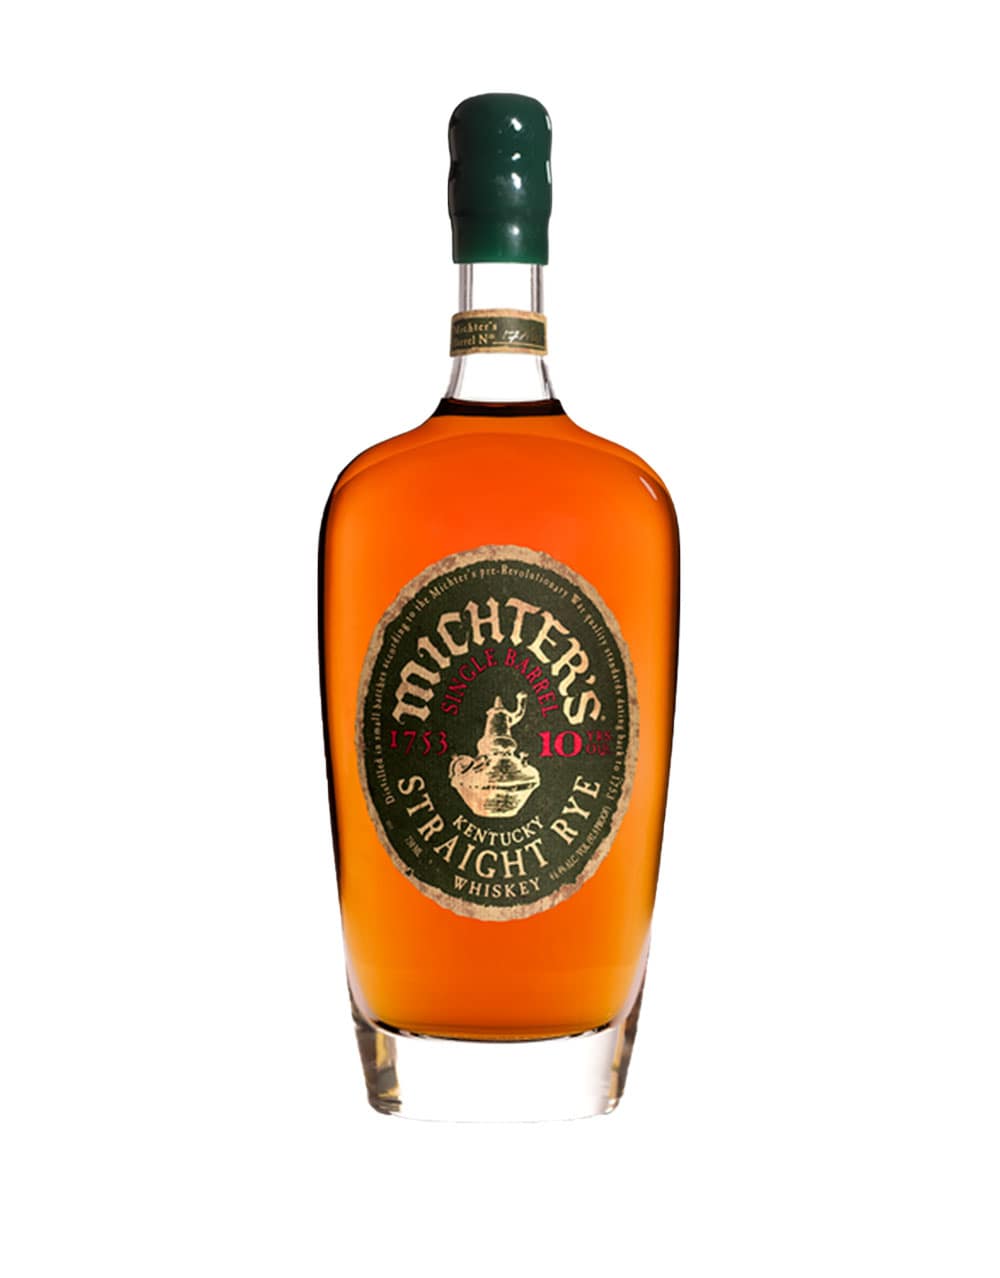 Michter's 10 Year old Single Barrel Straight Rye Whiskey